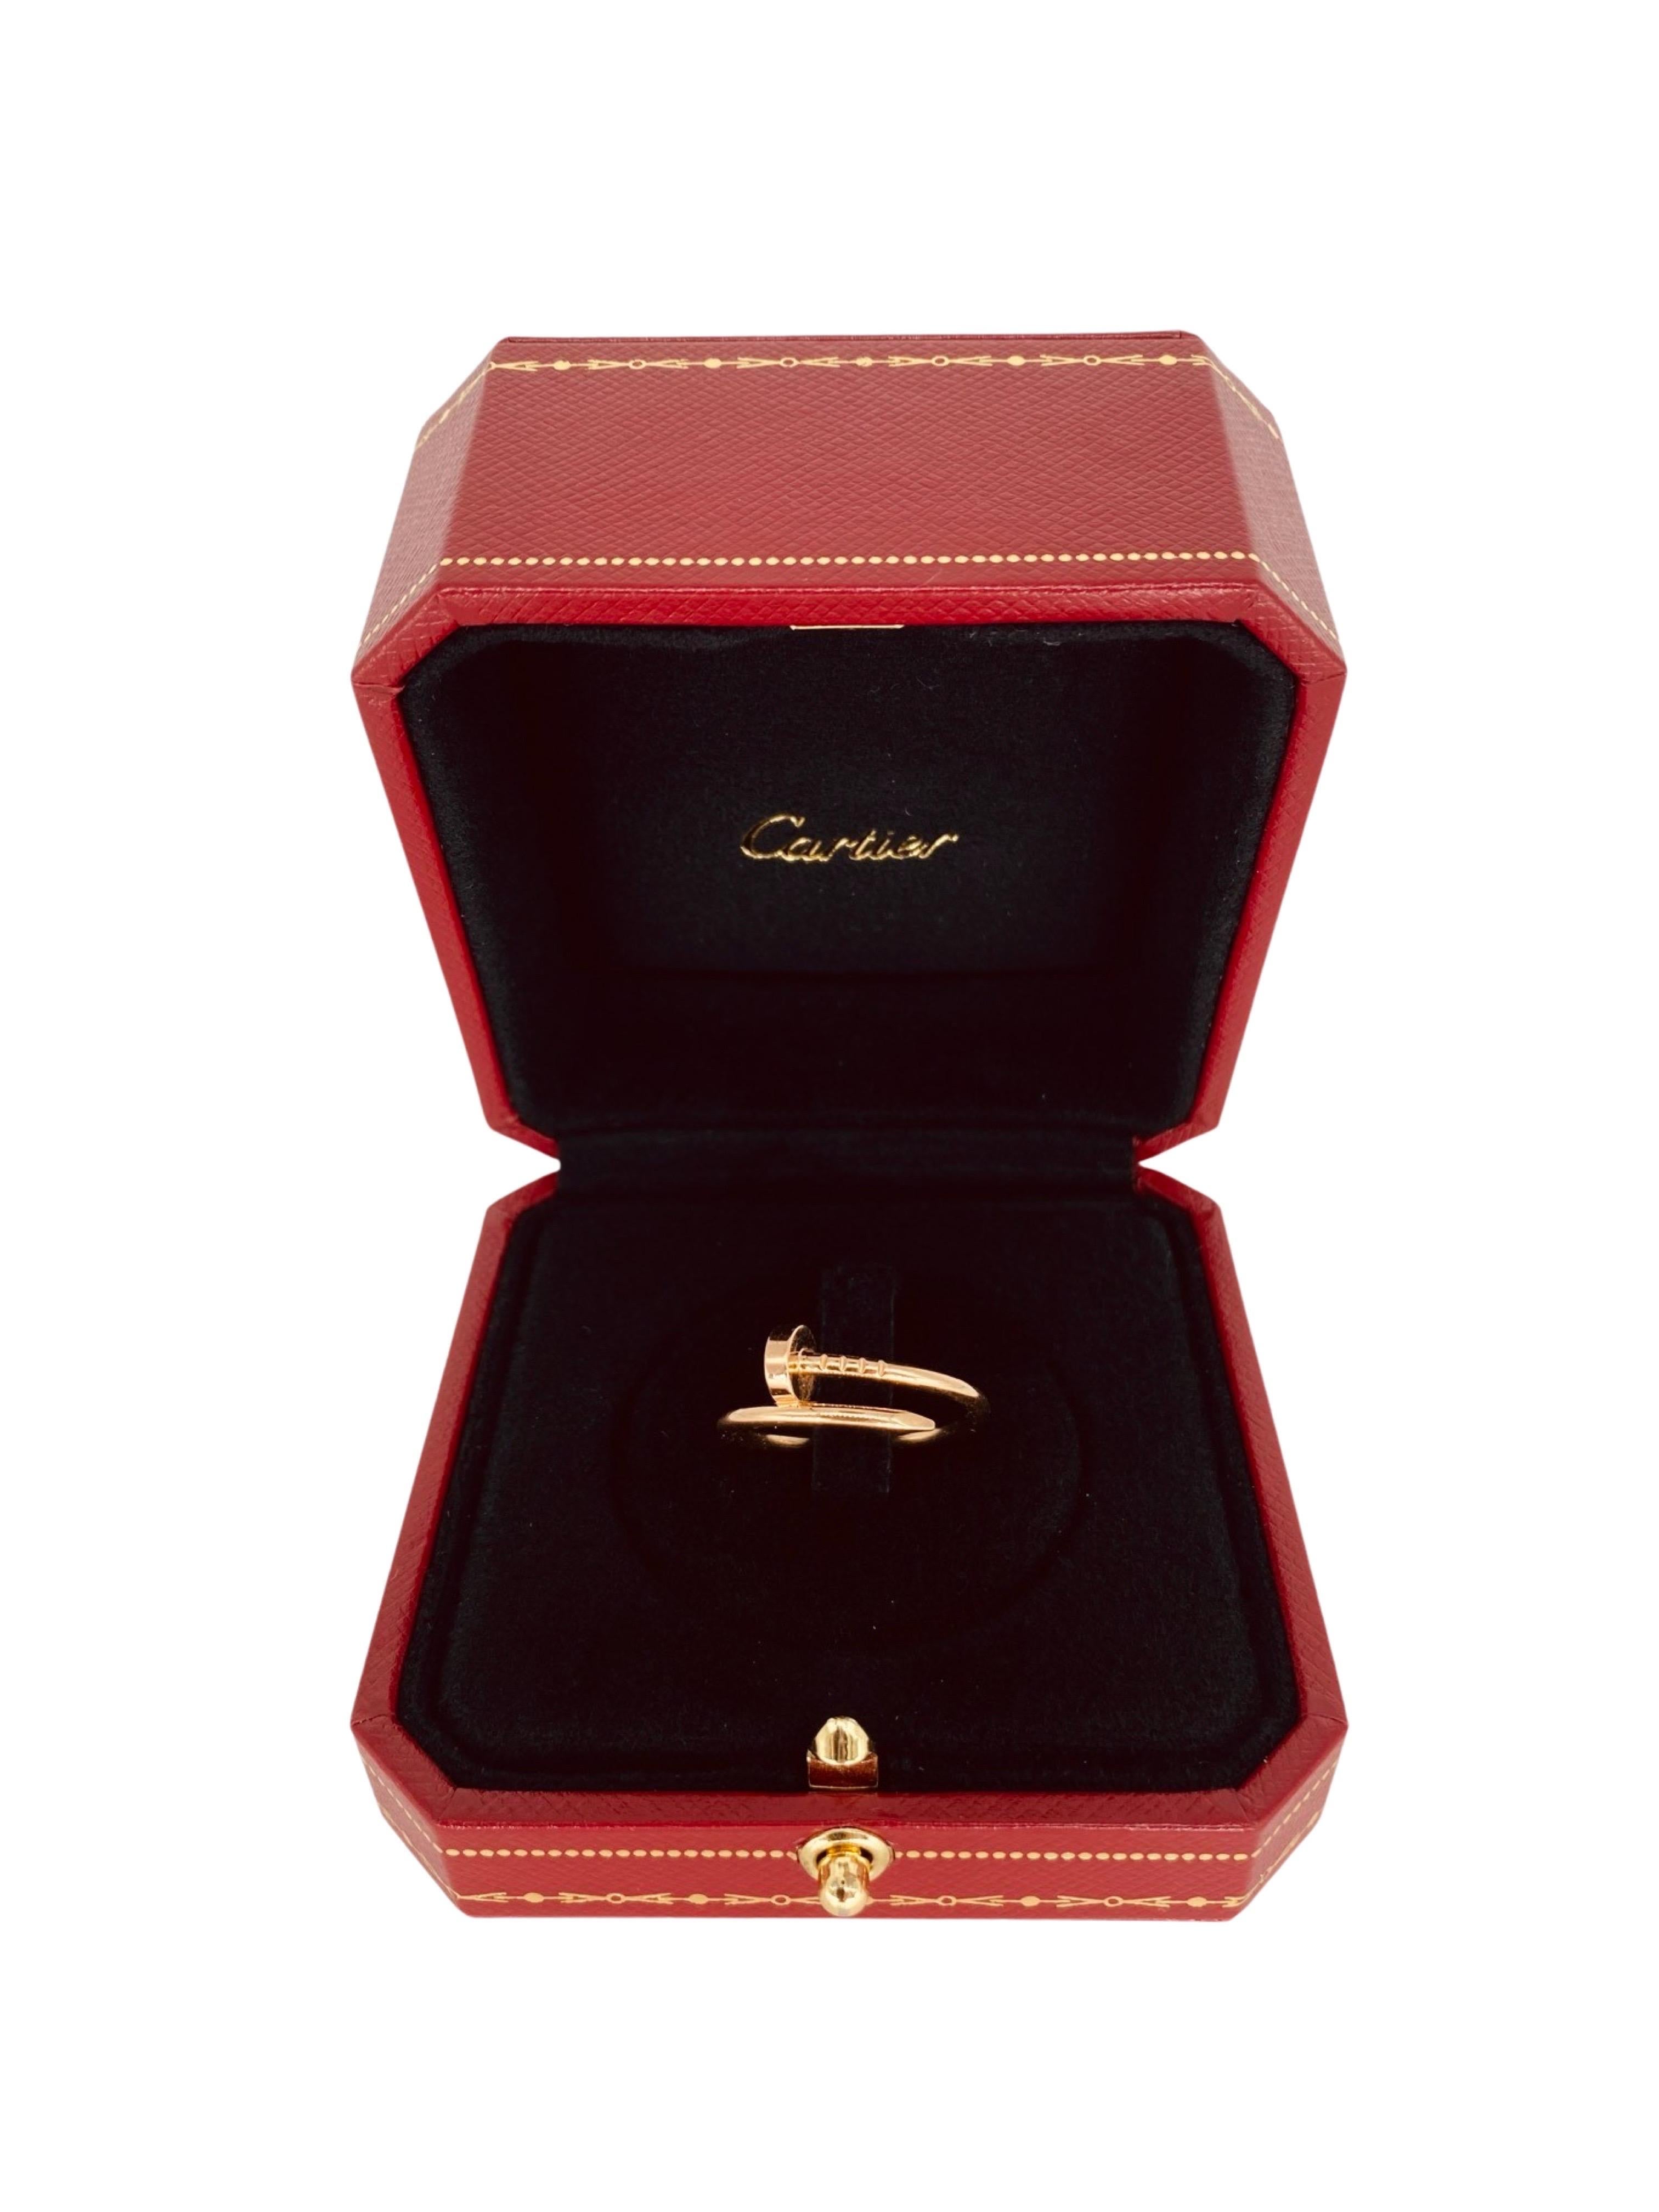 Cartier Juste un Clou ring in rose gold 18K
The nail part of the ring measures 1.8mm, is a size 6.75 and weights 3.6 grams
Cokes with original box as pictured 